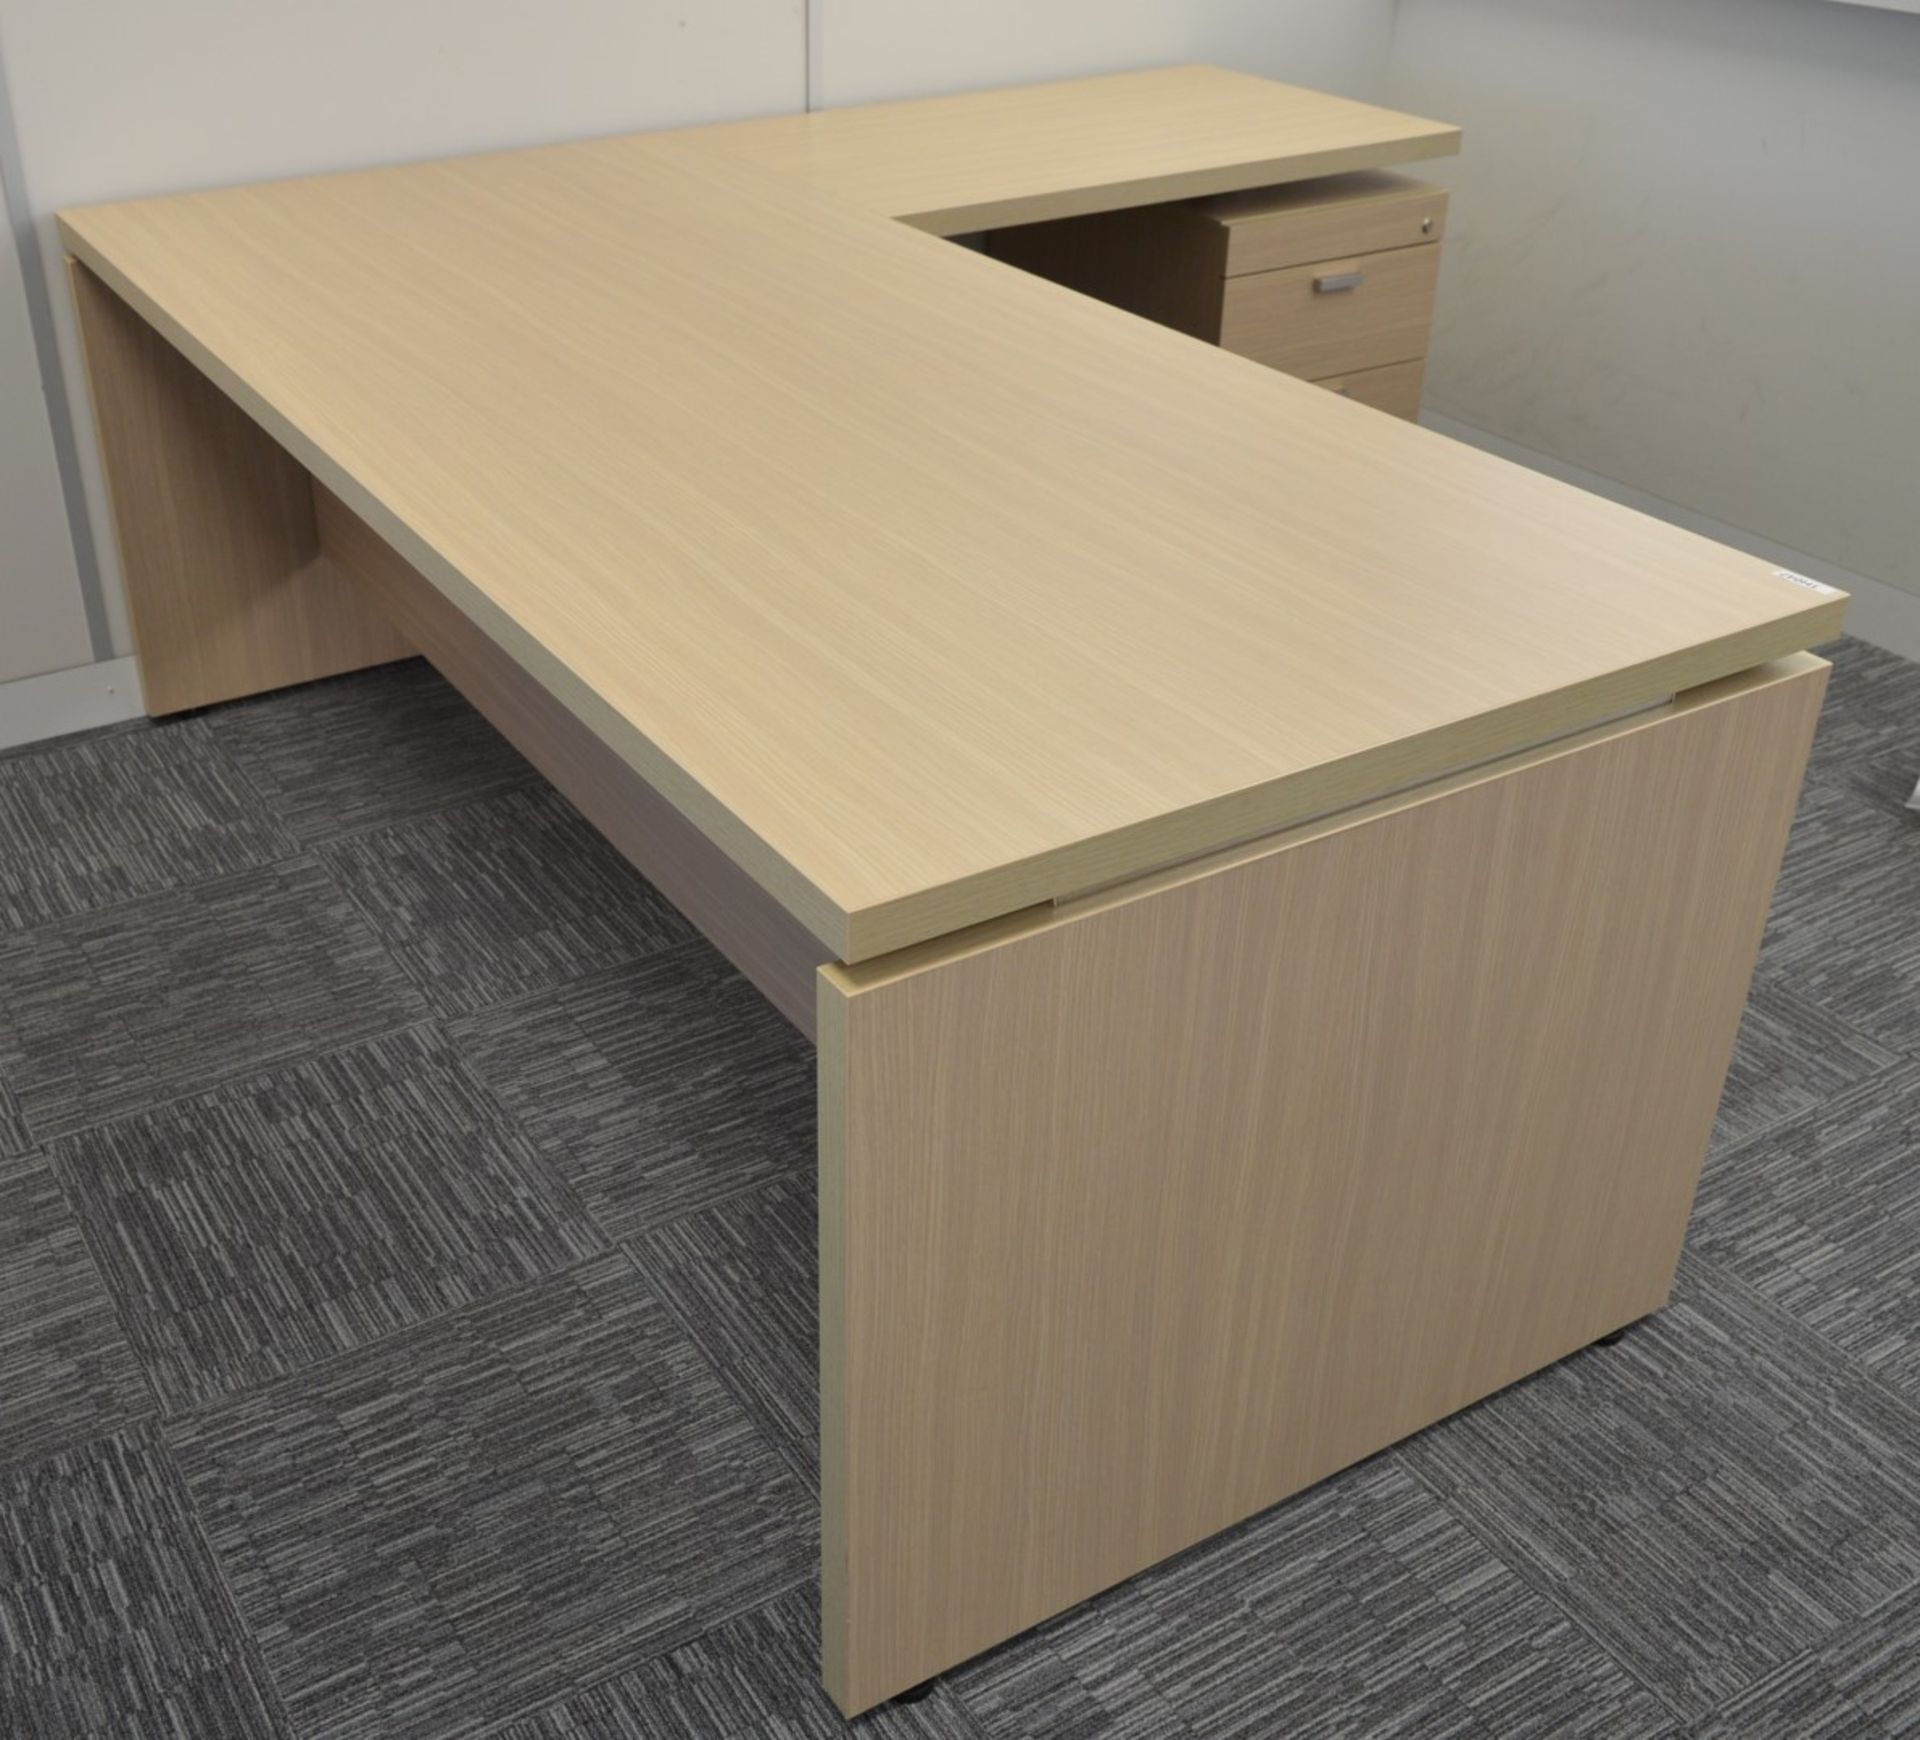 1 x Babini Executives Office Desk With Three Drawer Pedestal and Side Table - Attractive Finish With - Image 5 of 9